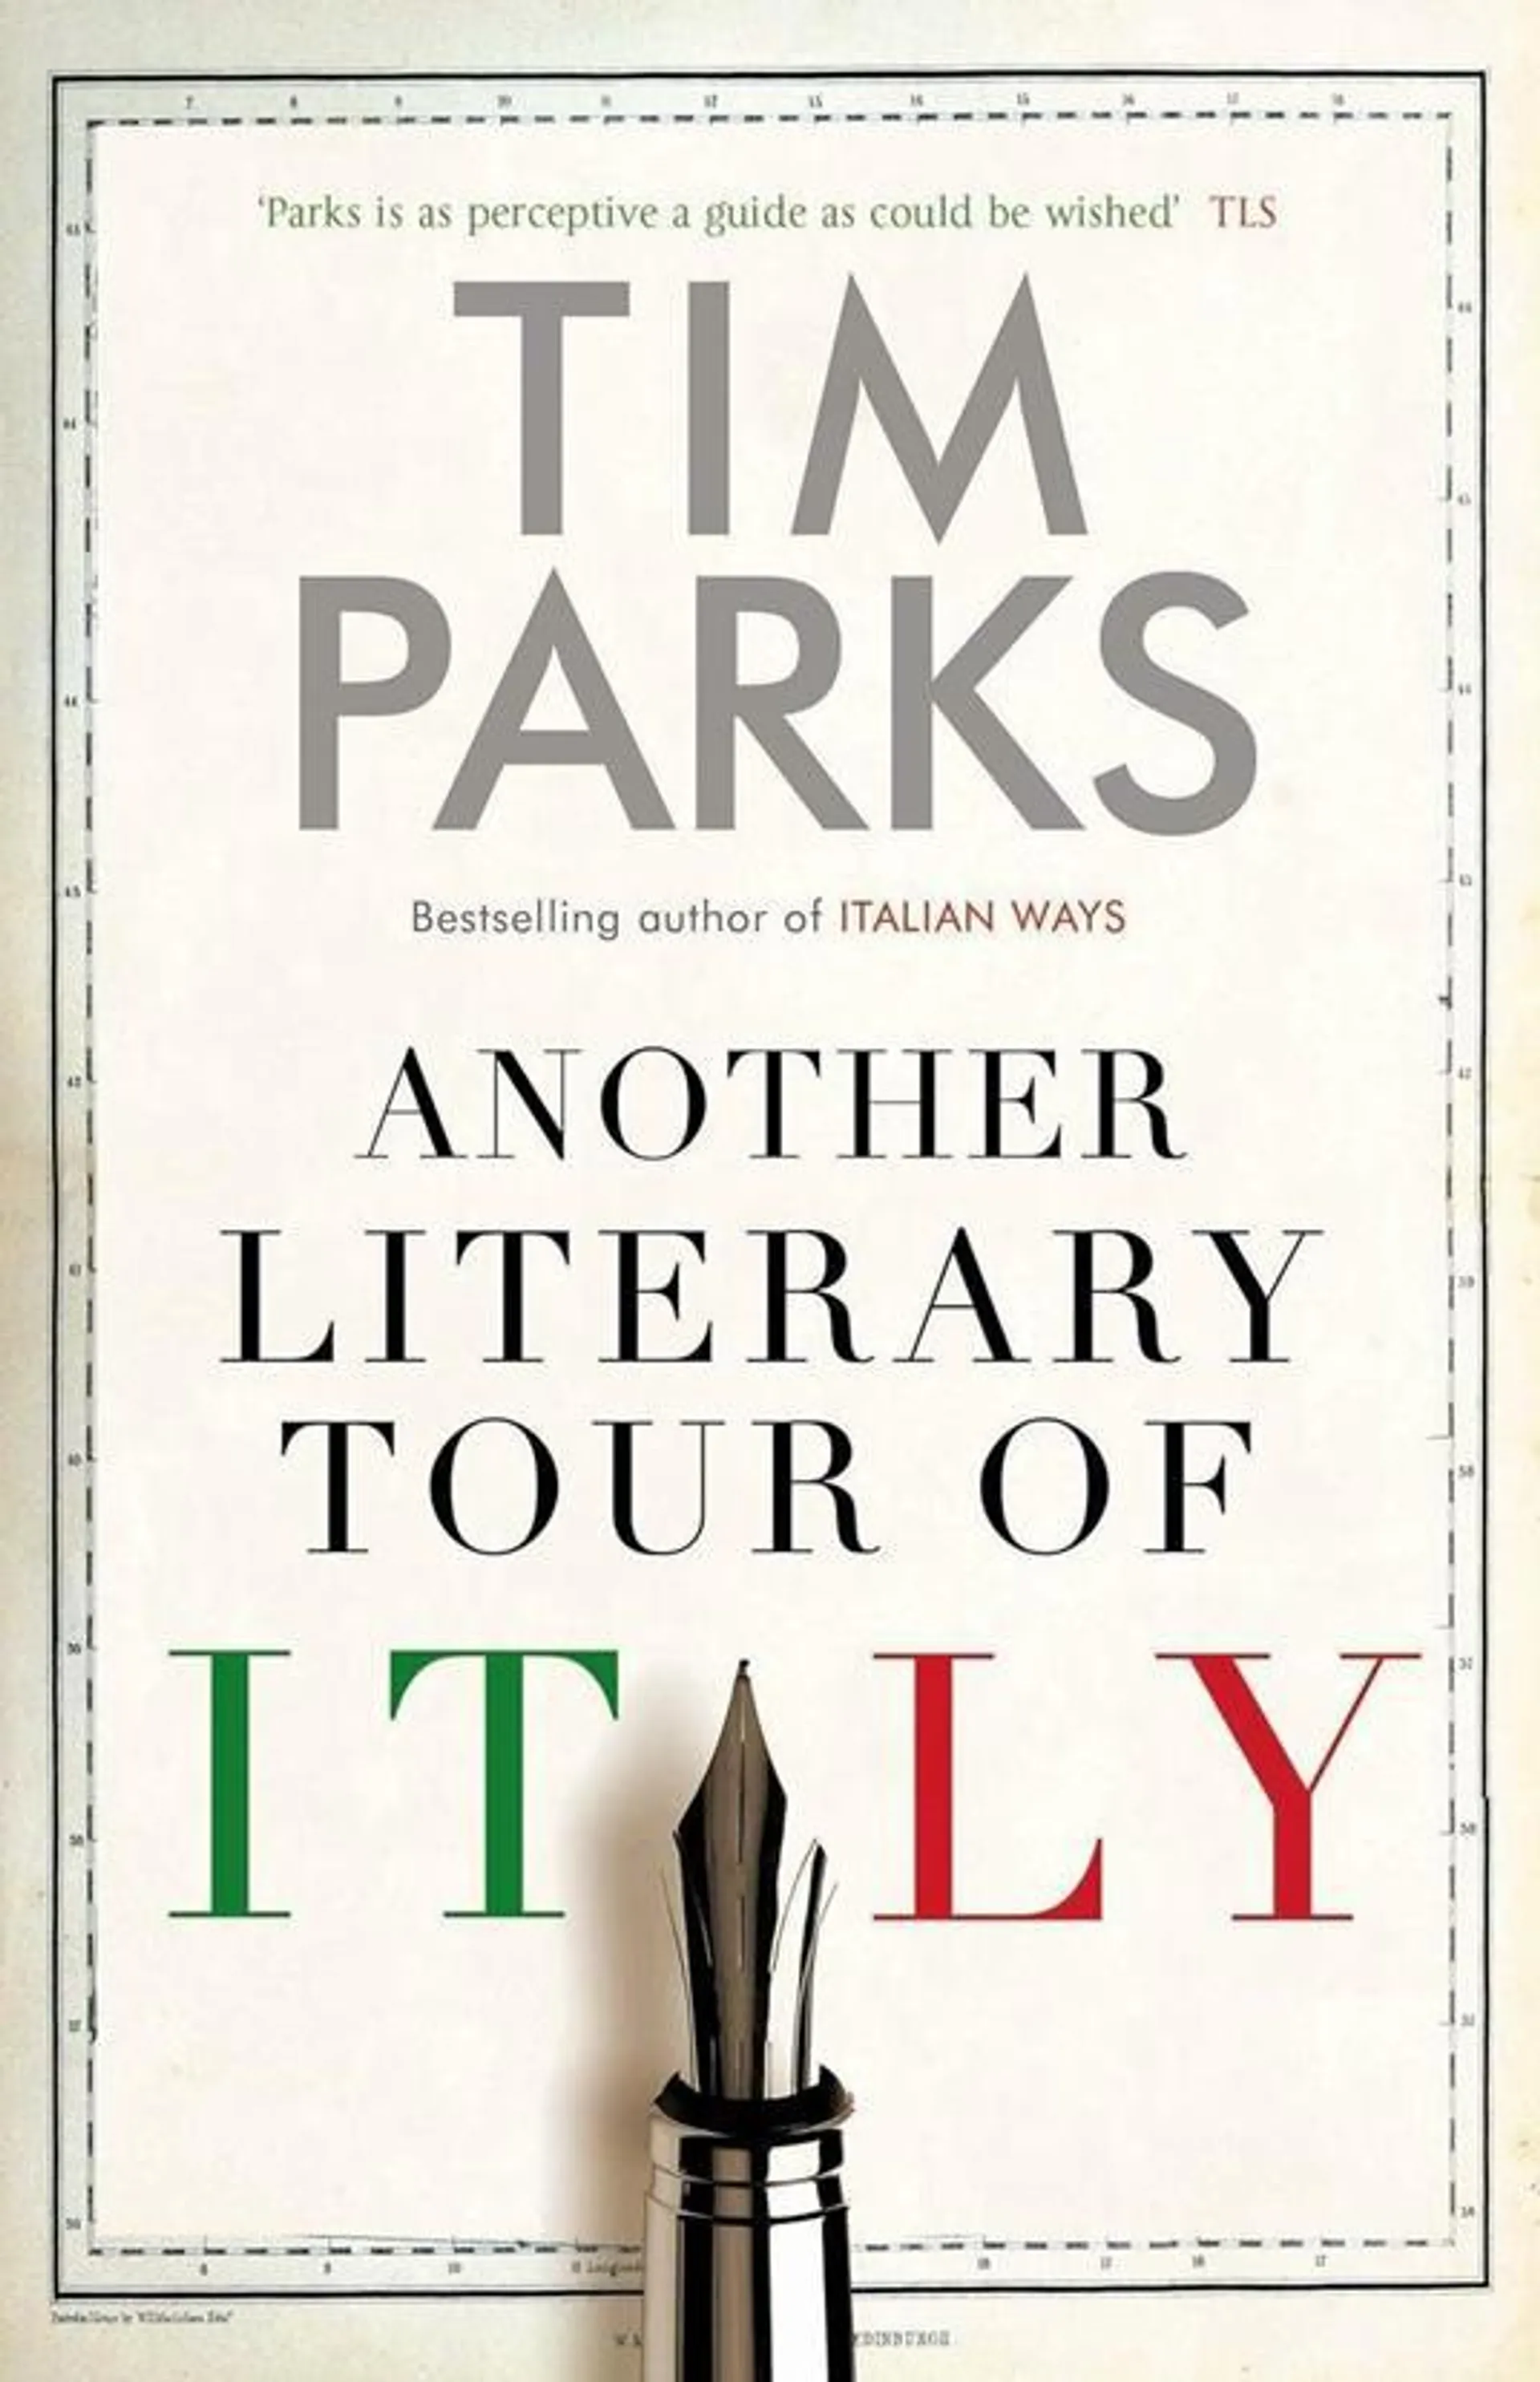 Another Literary Tour of Italy